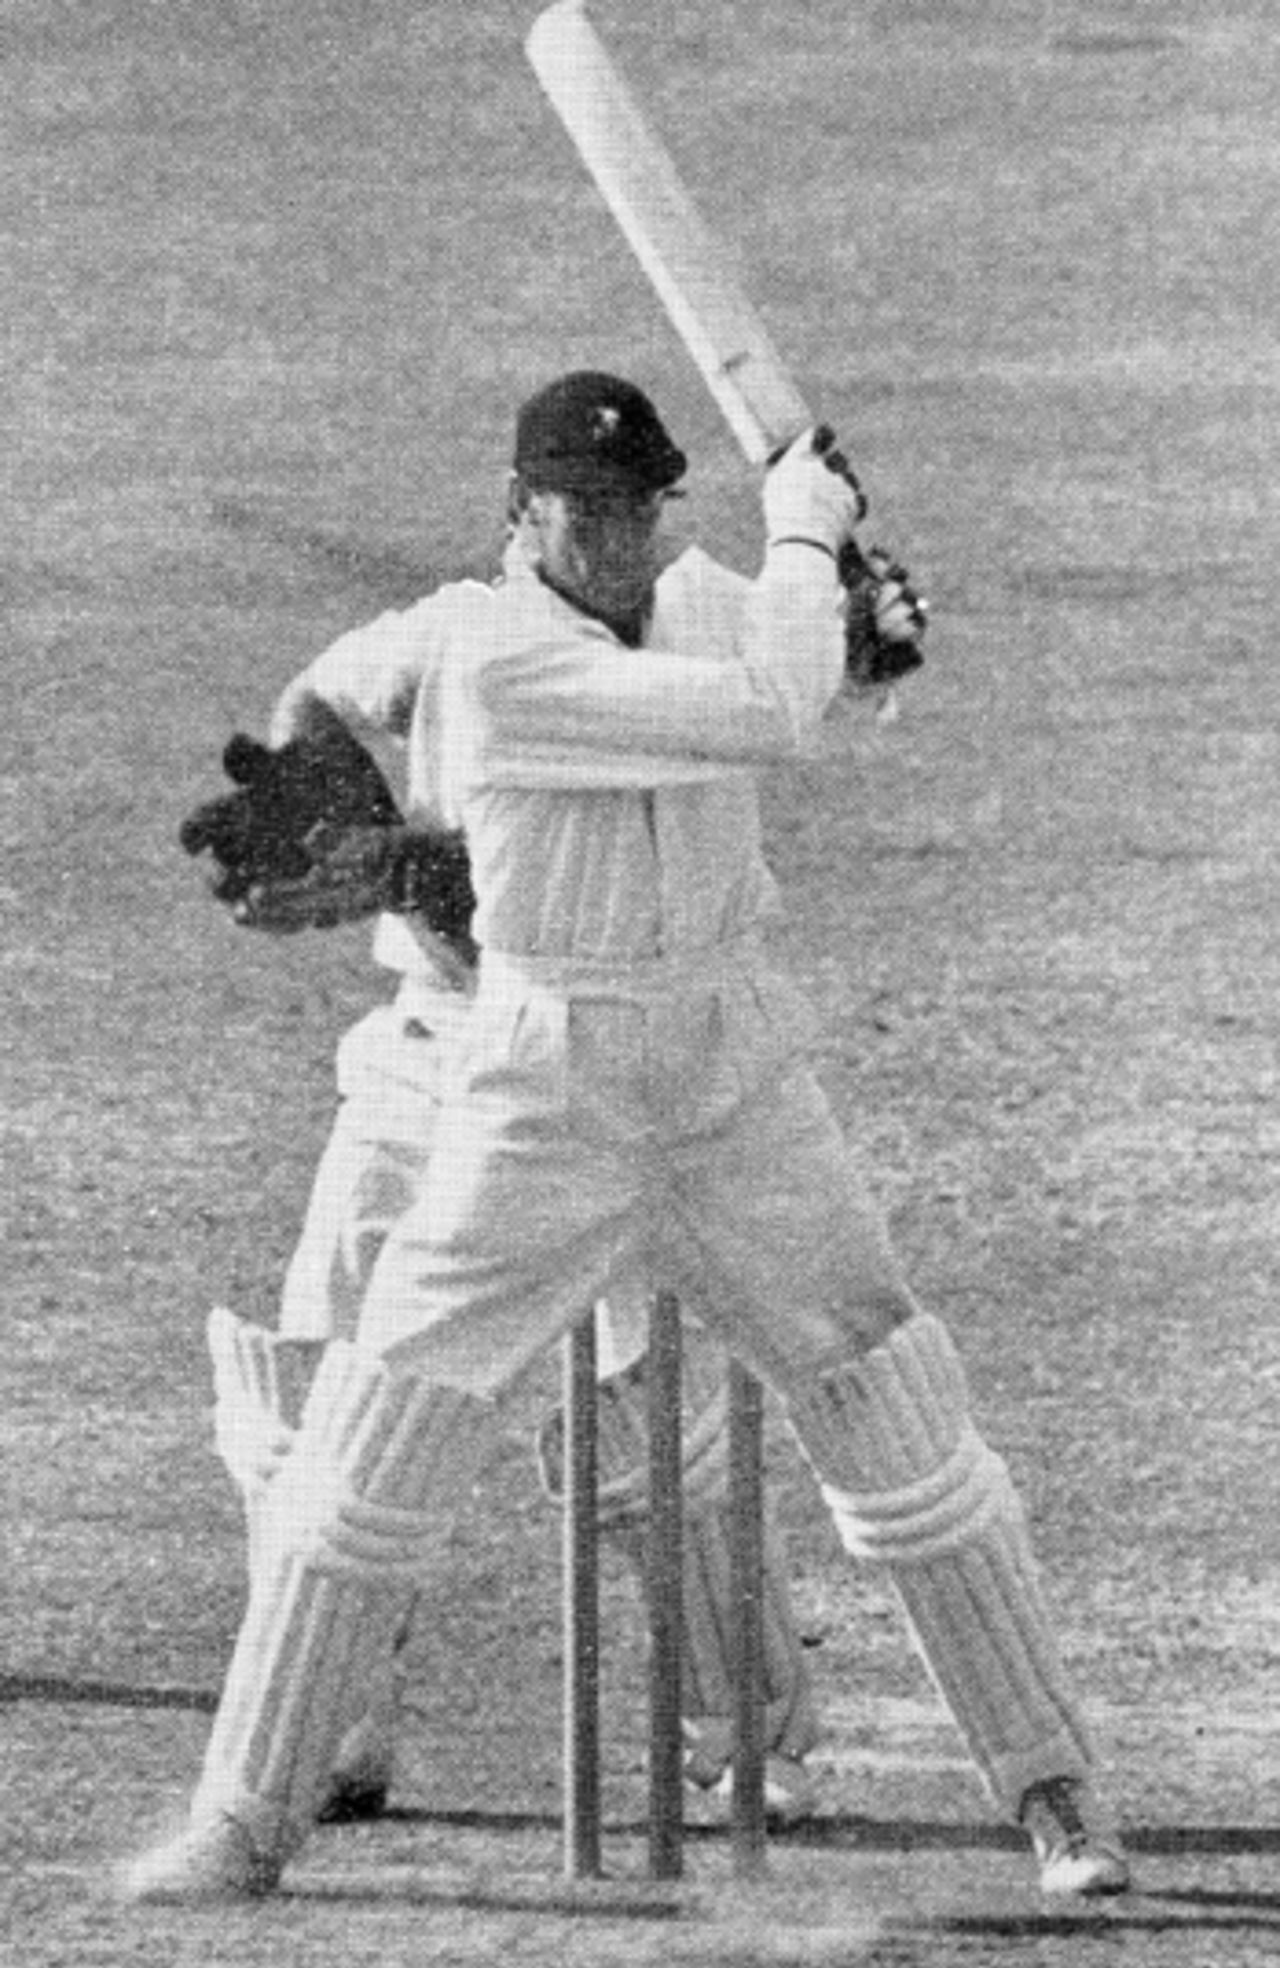 Alan Melville on his way to a hundred, England v South Africa, Trent Bridge, June 8, 1947